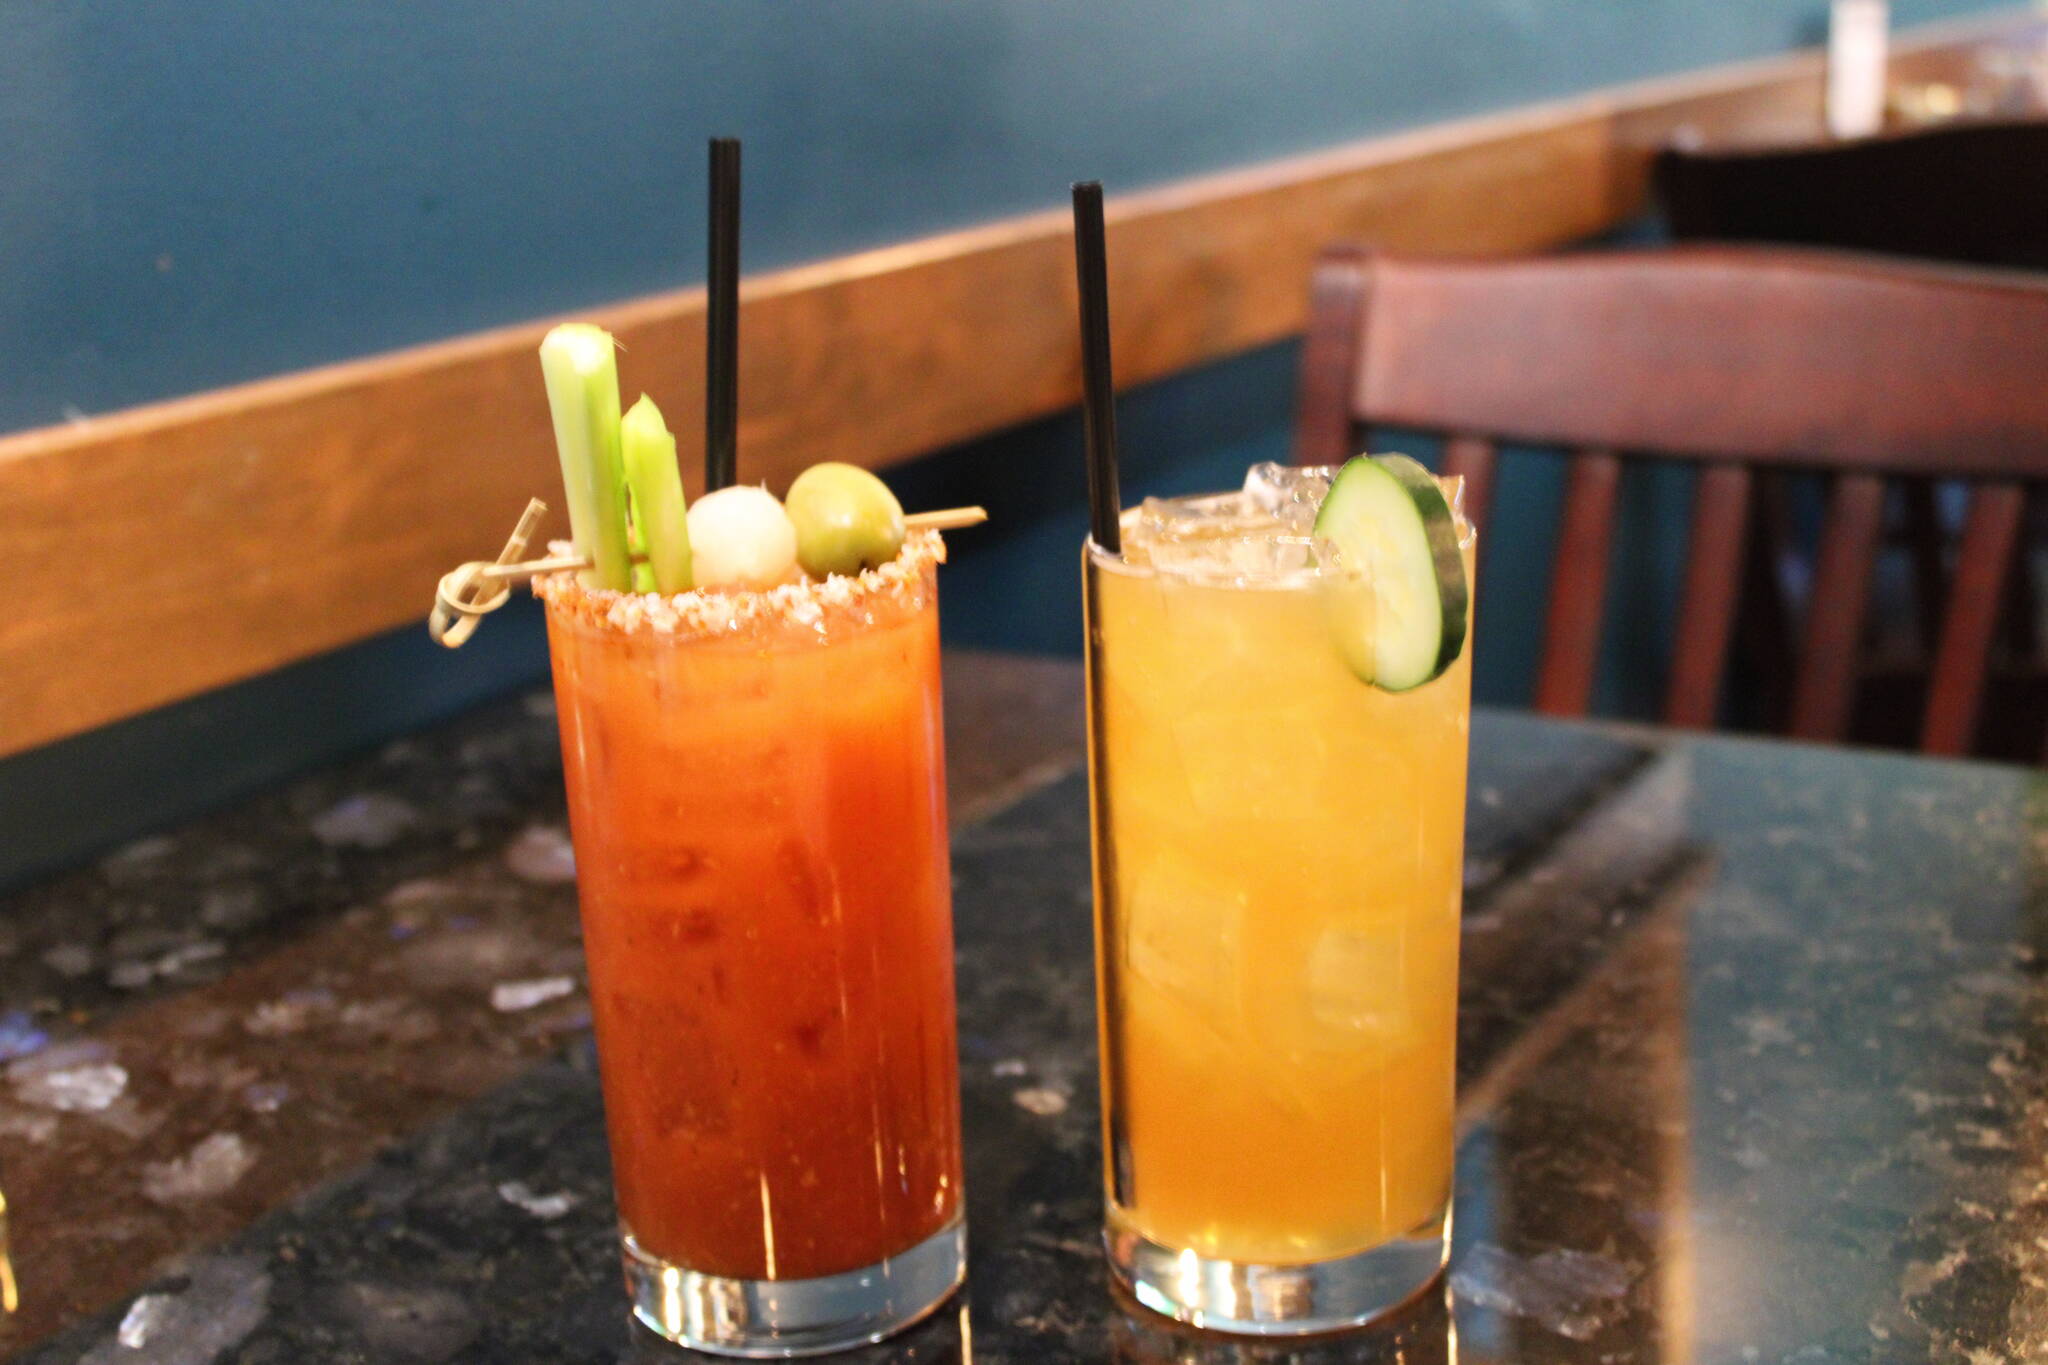 Cocktails are a key part of the New Orleans style brunch available at Roma Bistro on the Wharf on Saturday and Sunday between 10 a.m. and 2 p.m. The cocktail menu features bloody Mary’s (right) and the Big Easy (left). (Dana Zigmund / Juneau Empire)